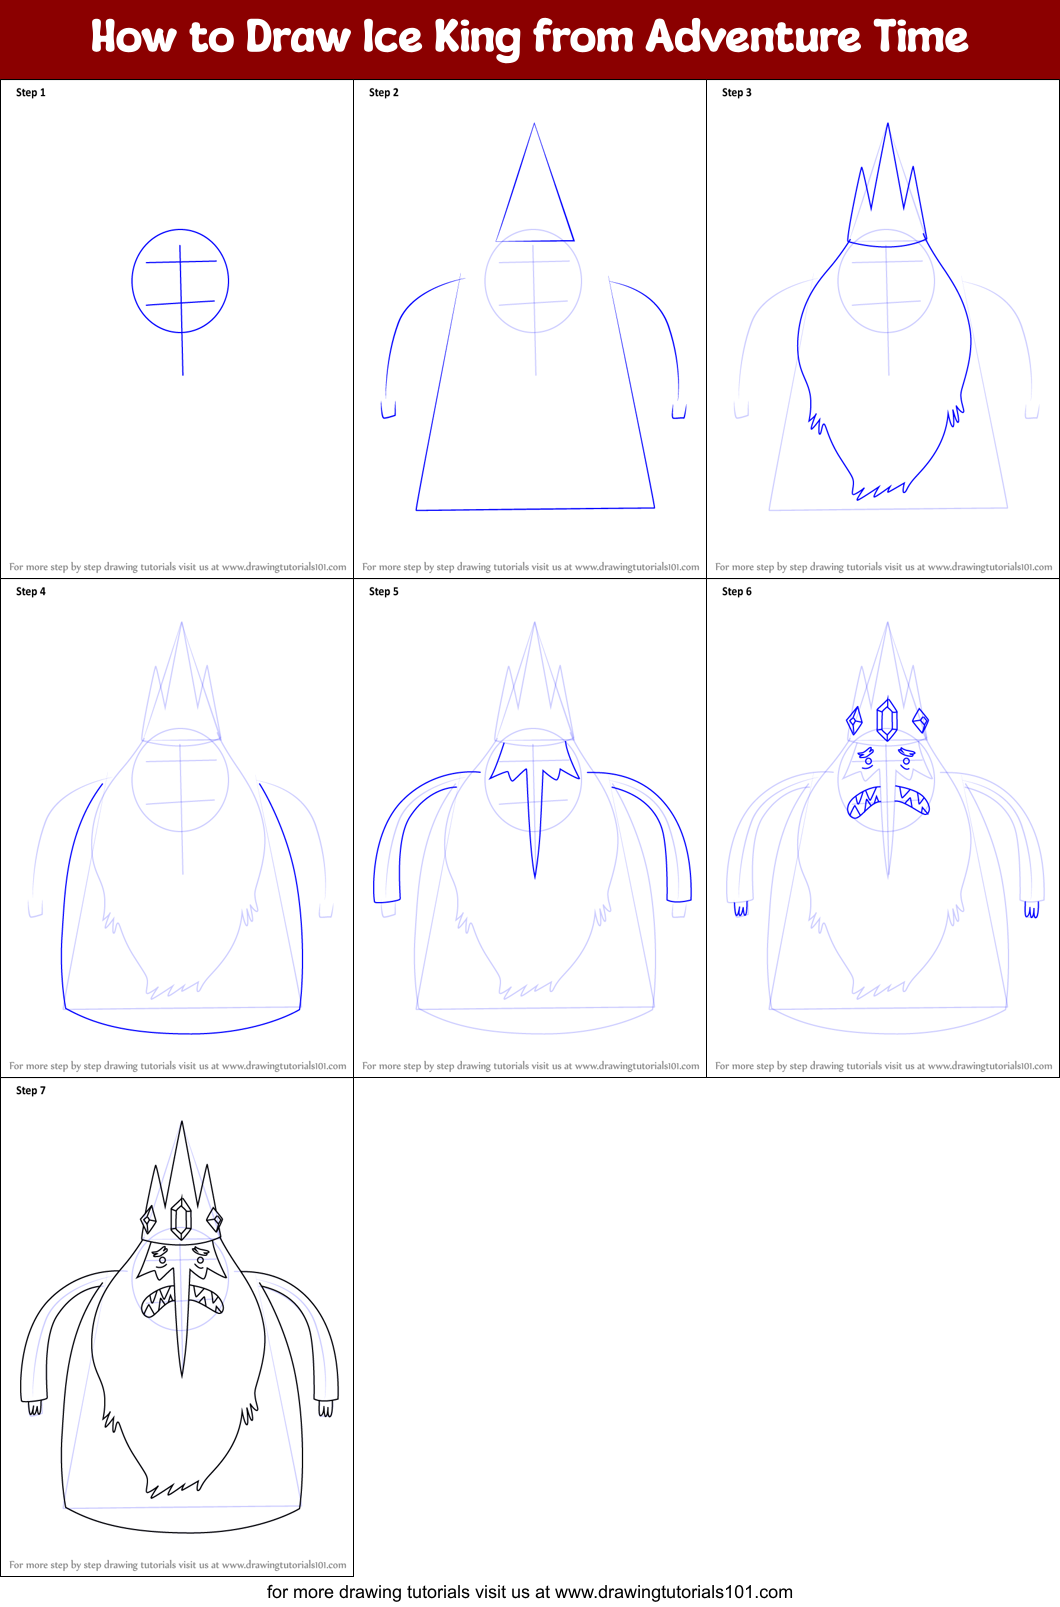 How to Draw Ice King from Adventure Time printable step by step drawing